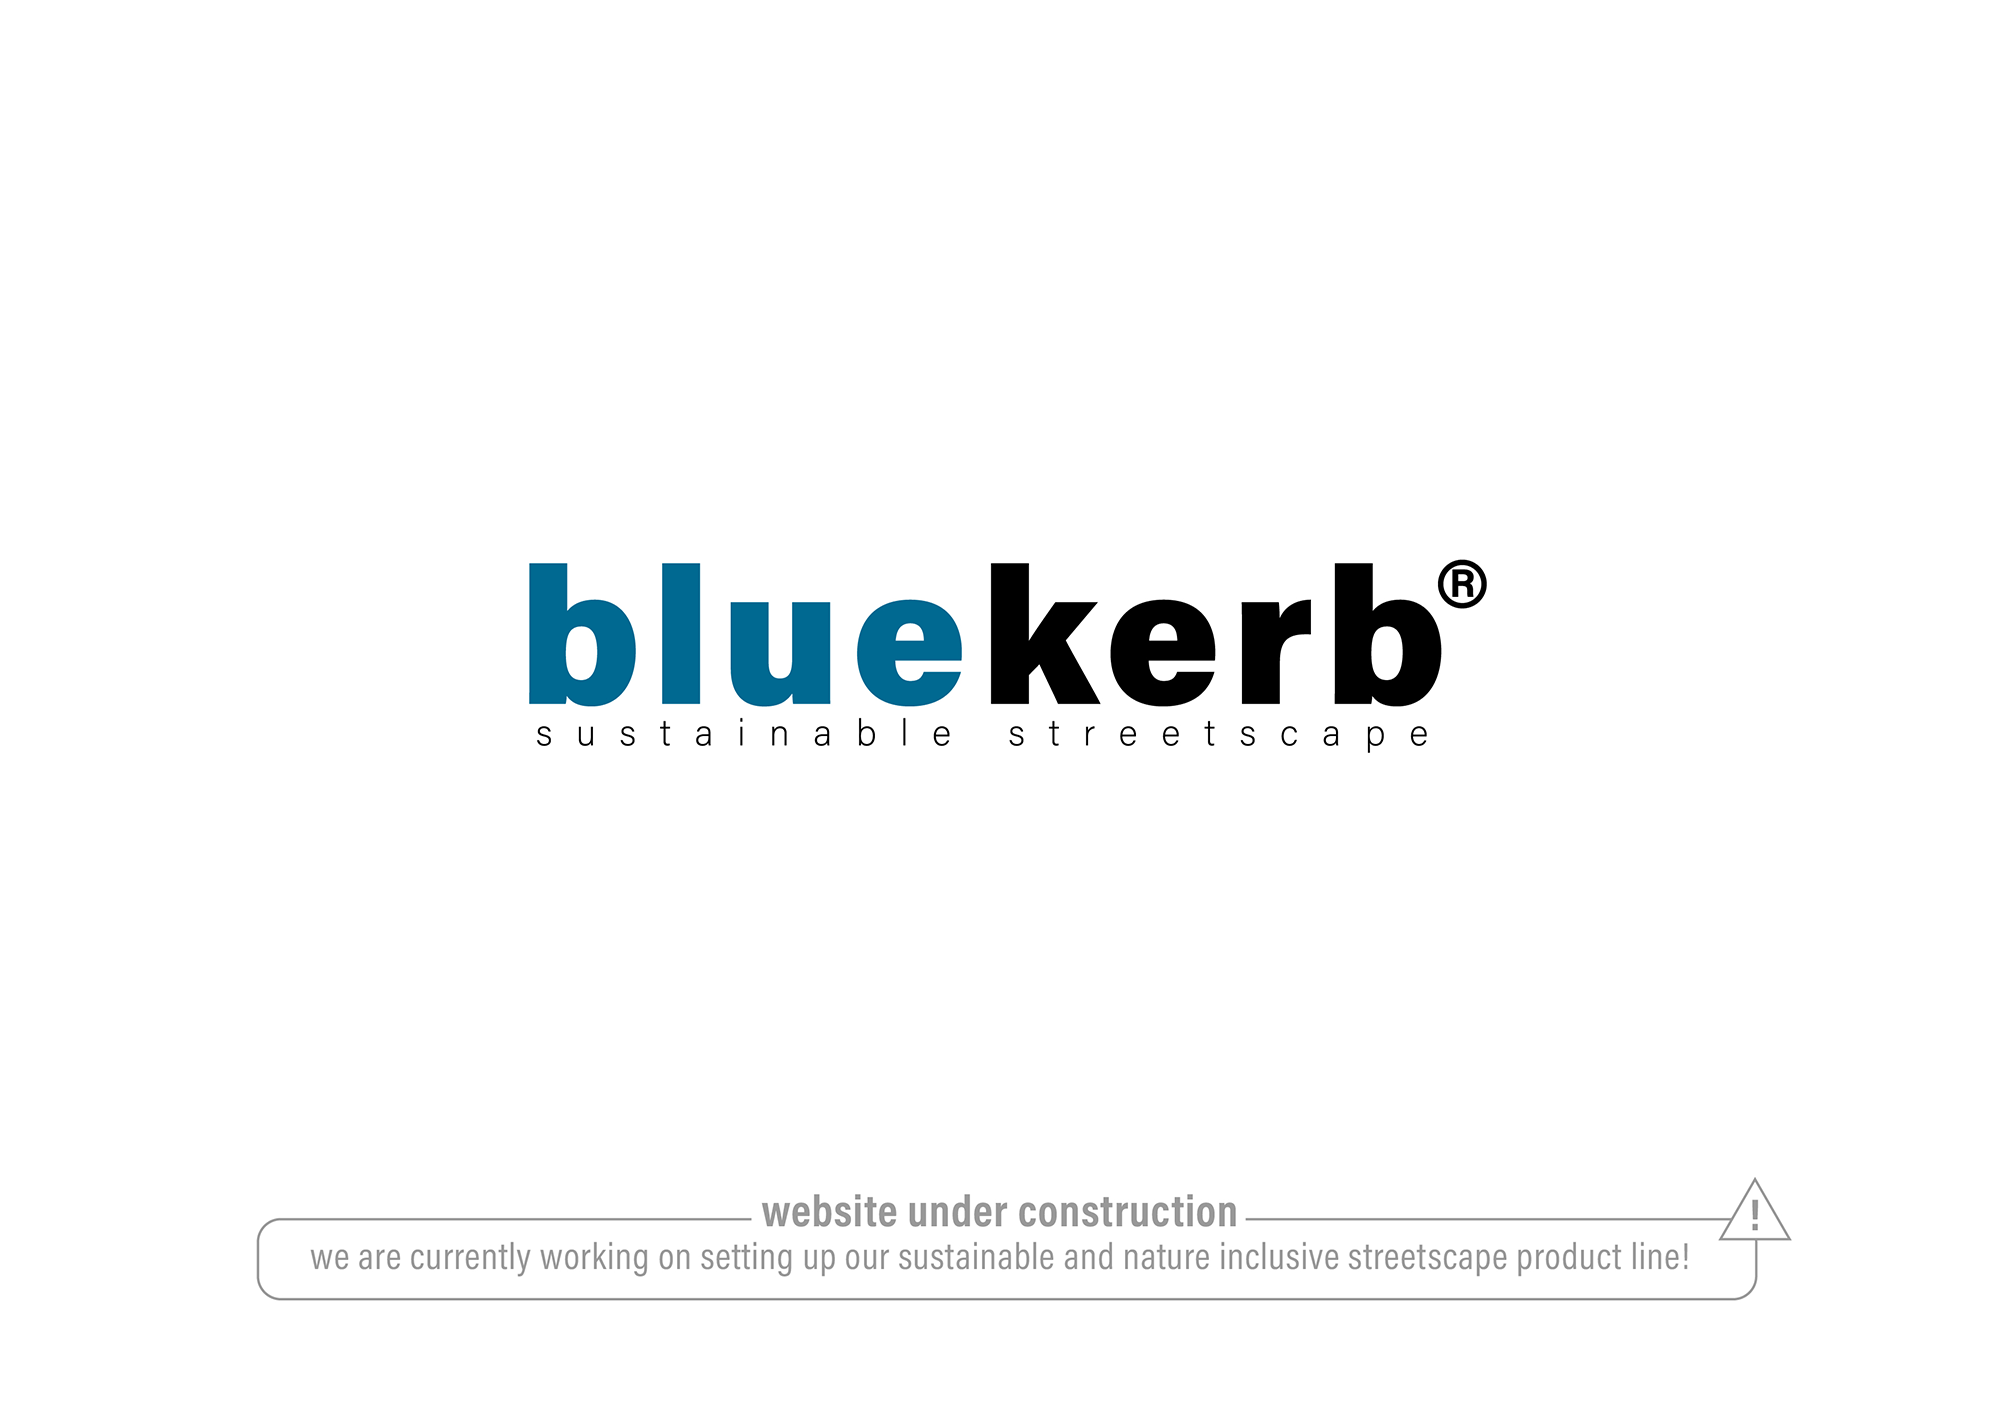 BlueKerb - If we won't change today... We don't change the future